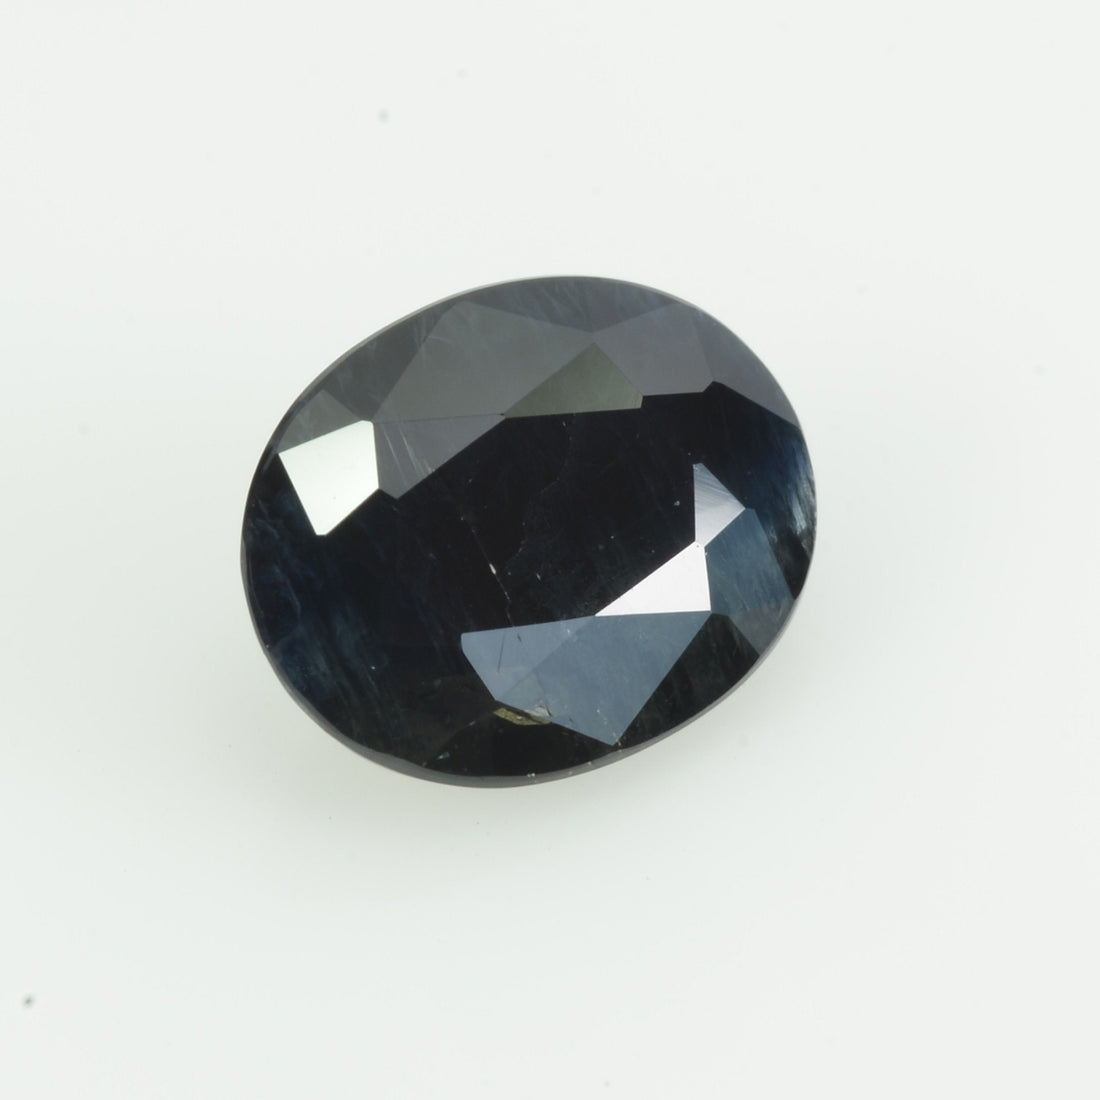 1.96 cts Natural Blue Sapphire Loose Gemstone Oval Cut